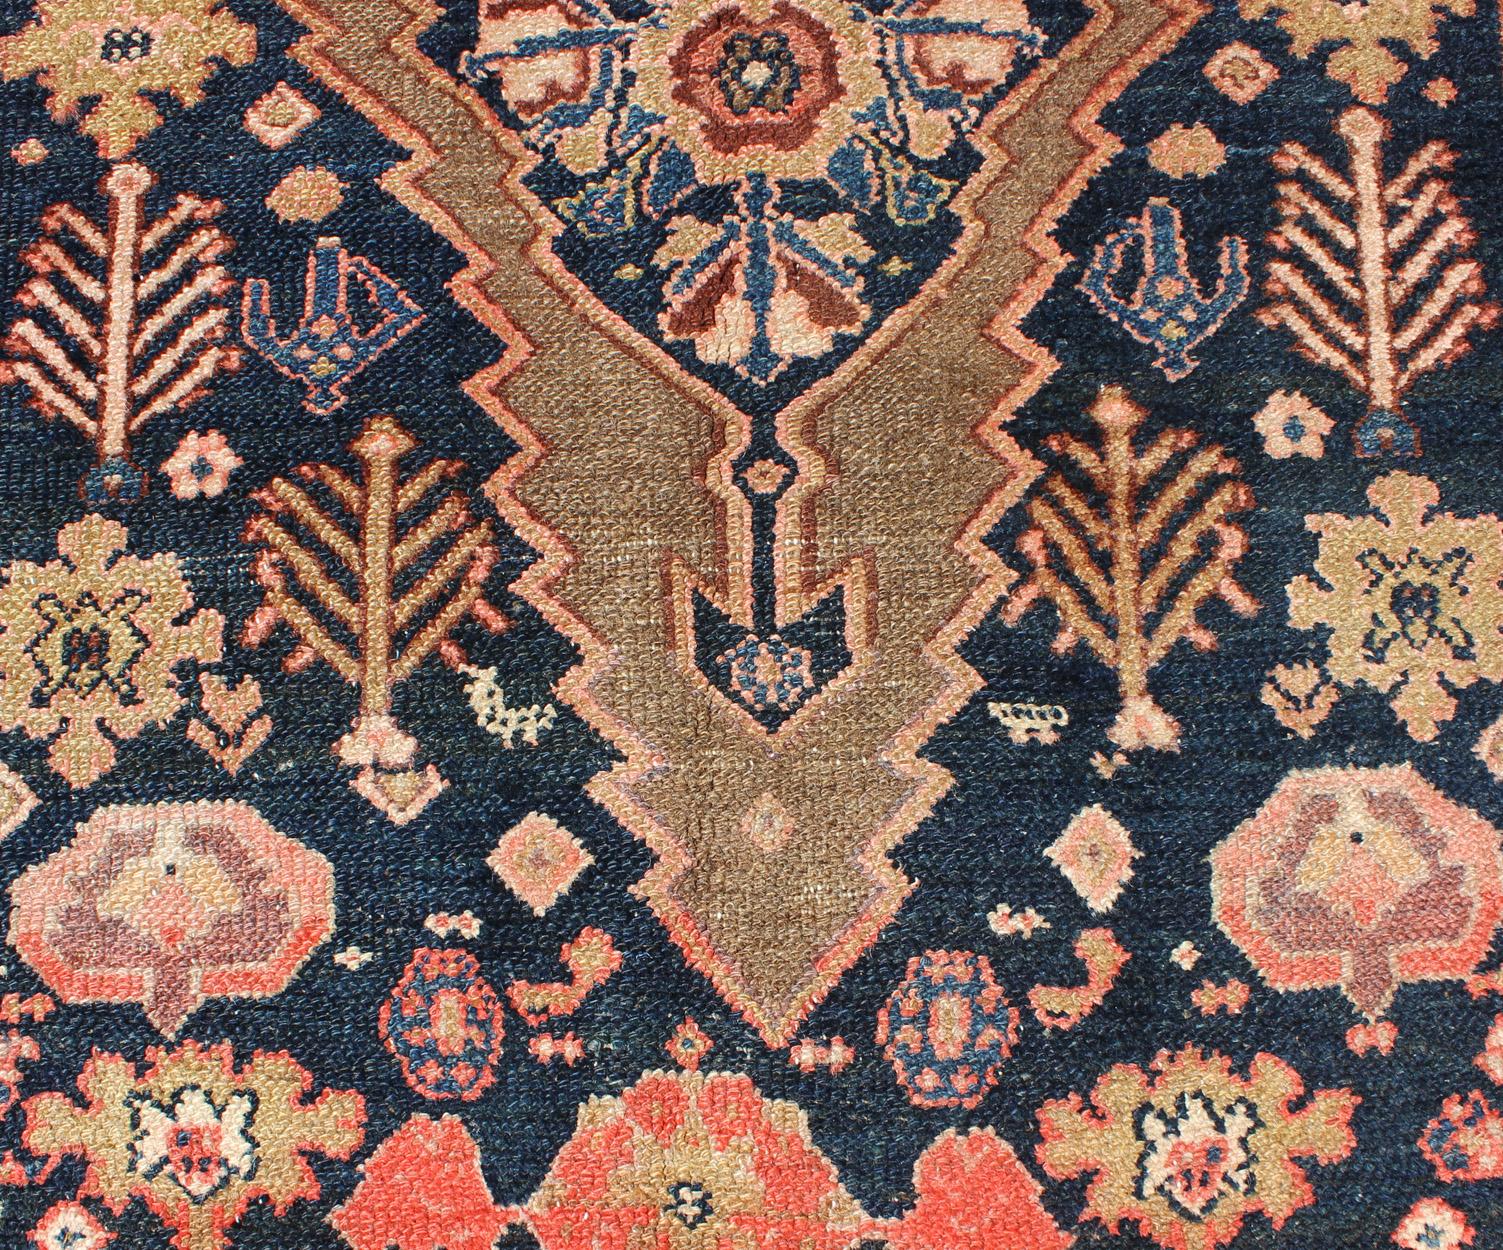 Tribal Medallion Design Antique Persian Serab Rug in Camel and Shades of Blue For Sale 2